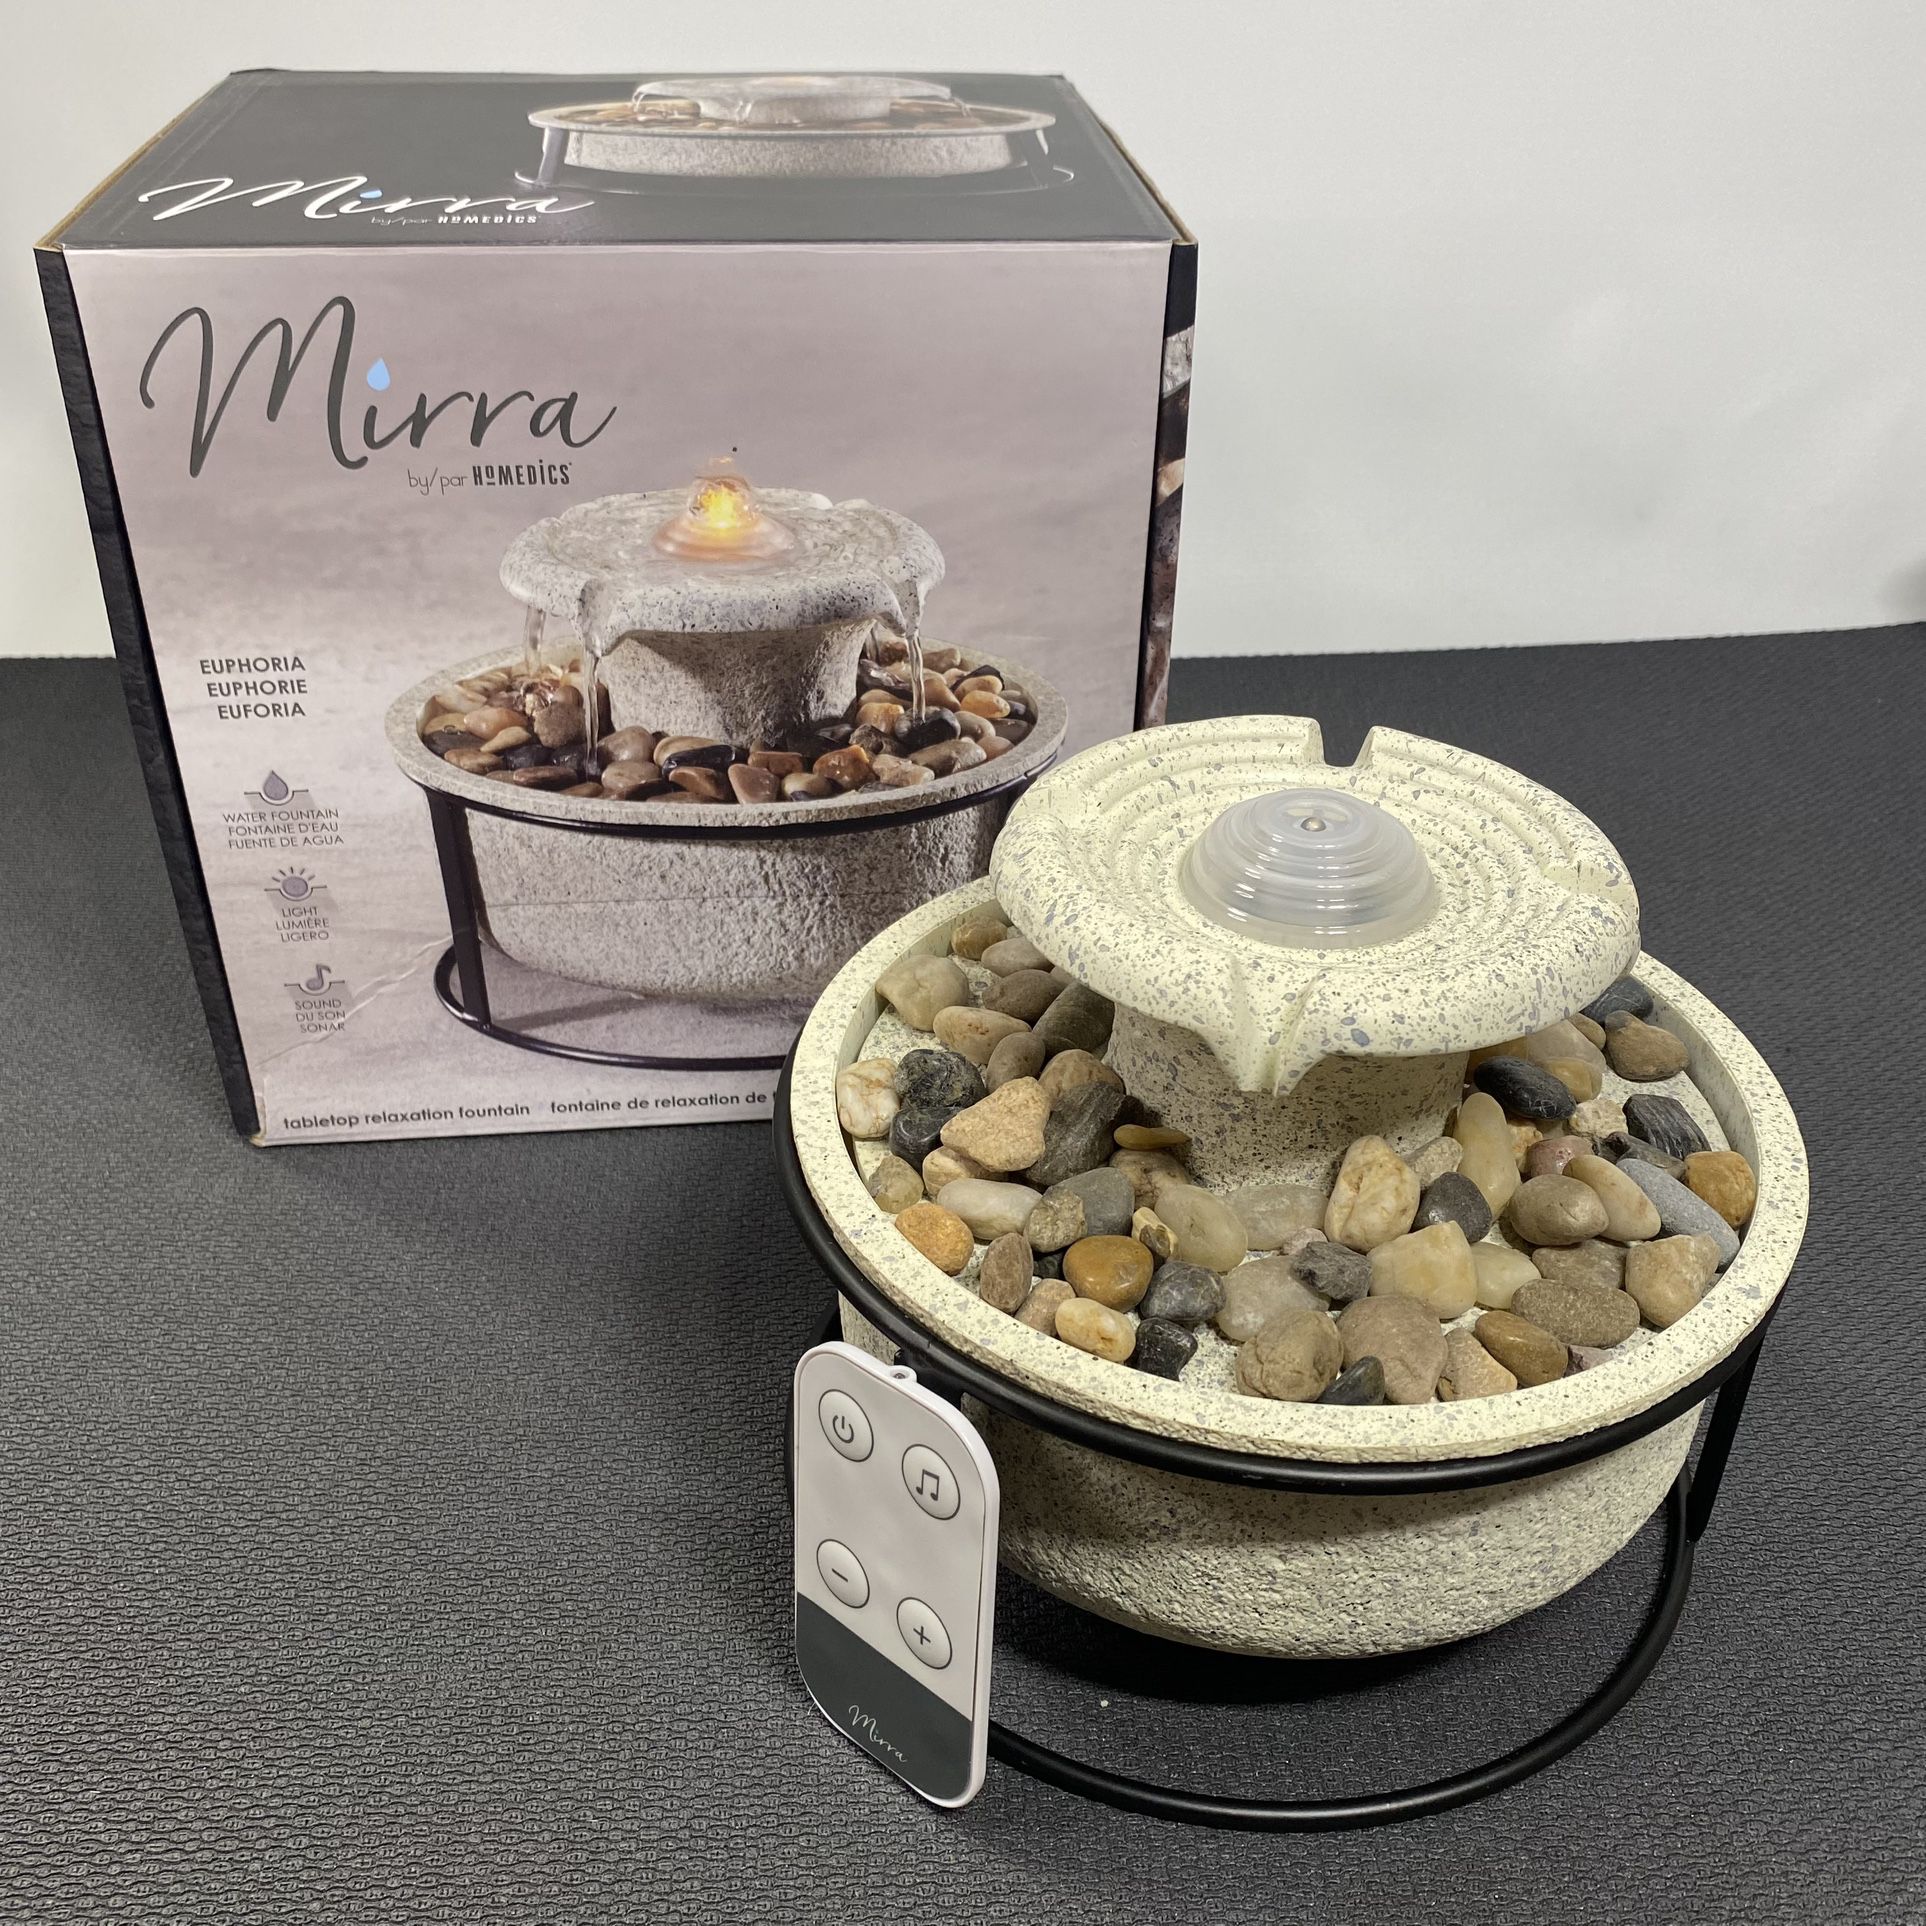 NEW Homedics Mirra Euphoria Tabletop Relaxation Fountain Waterfall Water Light and Soothing Music Perfect for a Gift present birthday Christmas